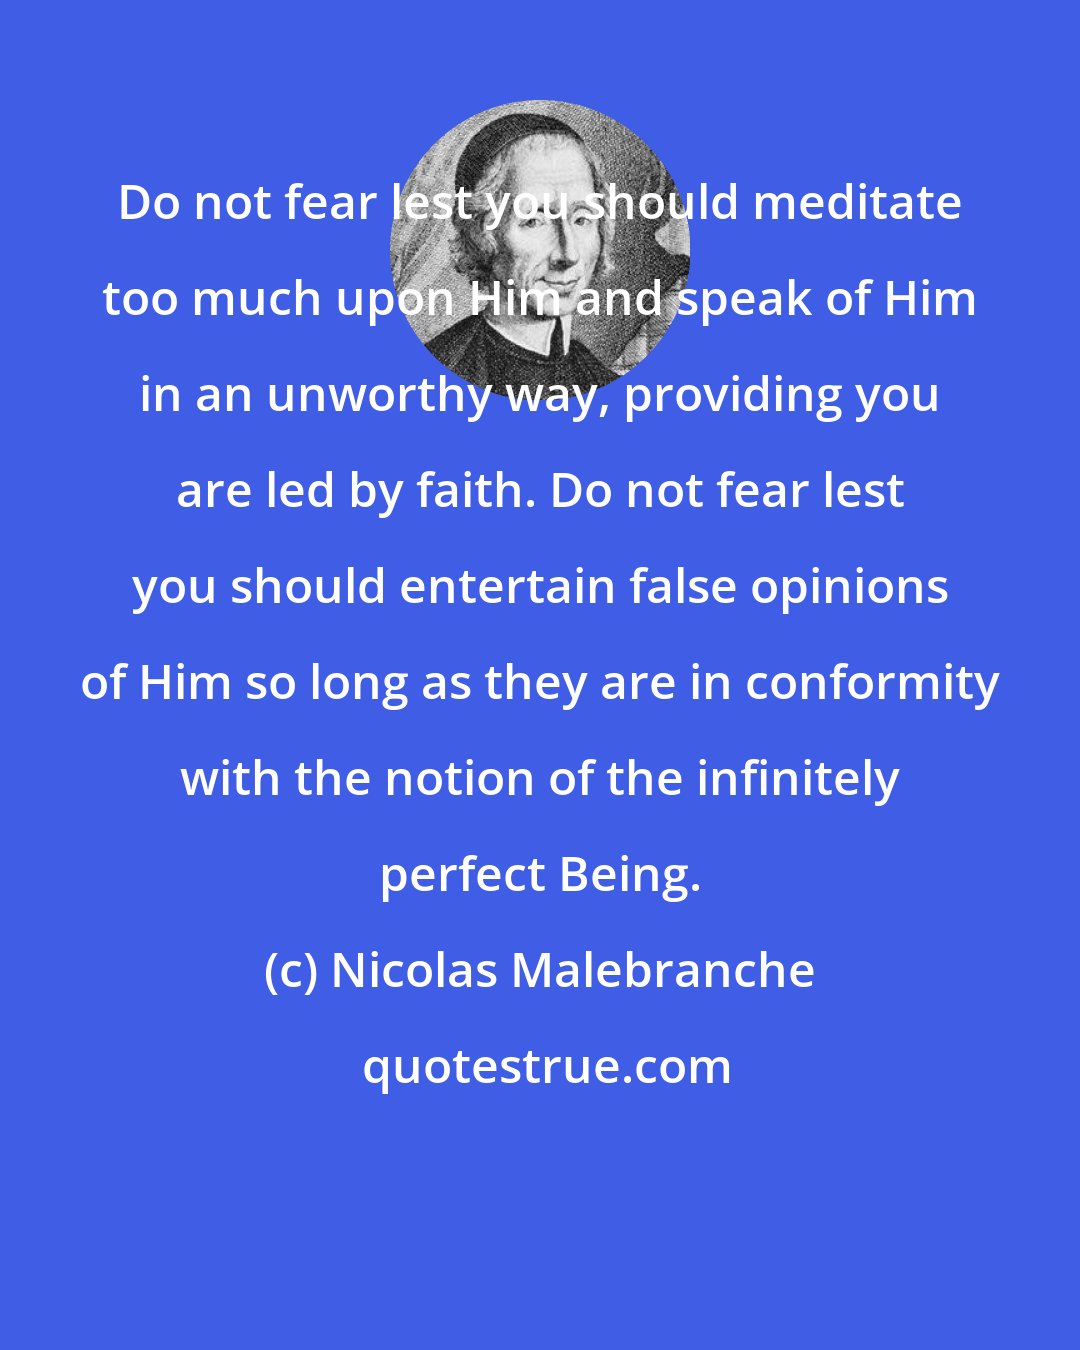 Nicolas Malebranche: Do not fear lest you should meditate too much upon Him and speak of Him in an unworthy way, providing you are led by faith. Do not fear lest you should entertain false opinions of Him so long as they are in conformity with the notion of the infinitely perfect Being.